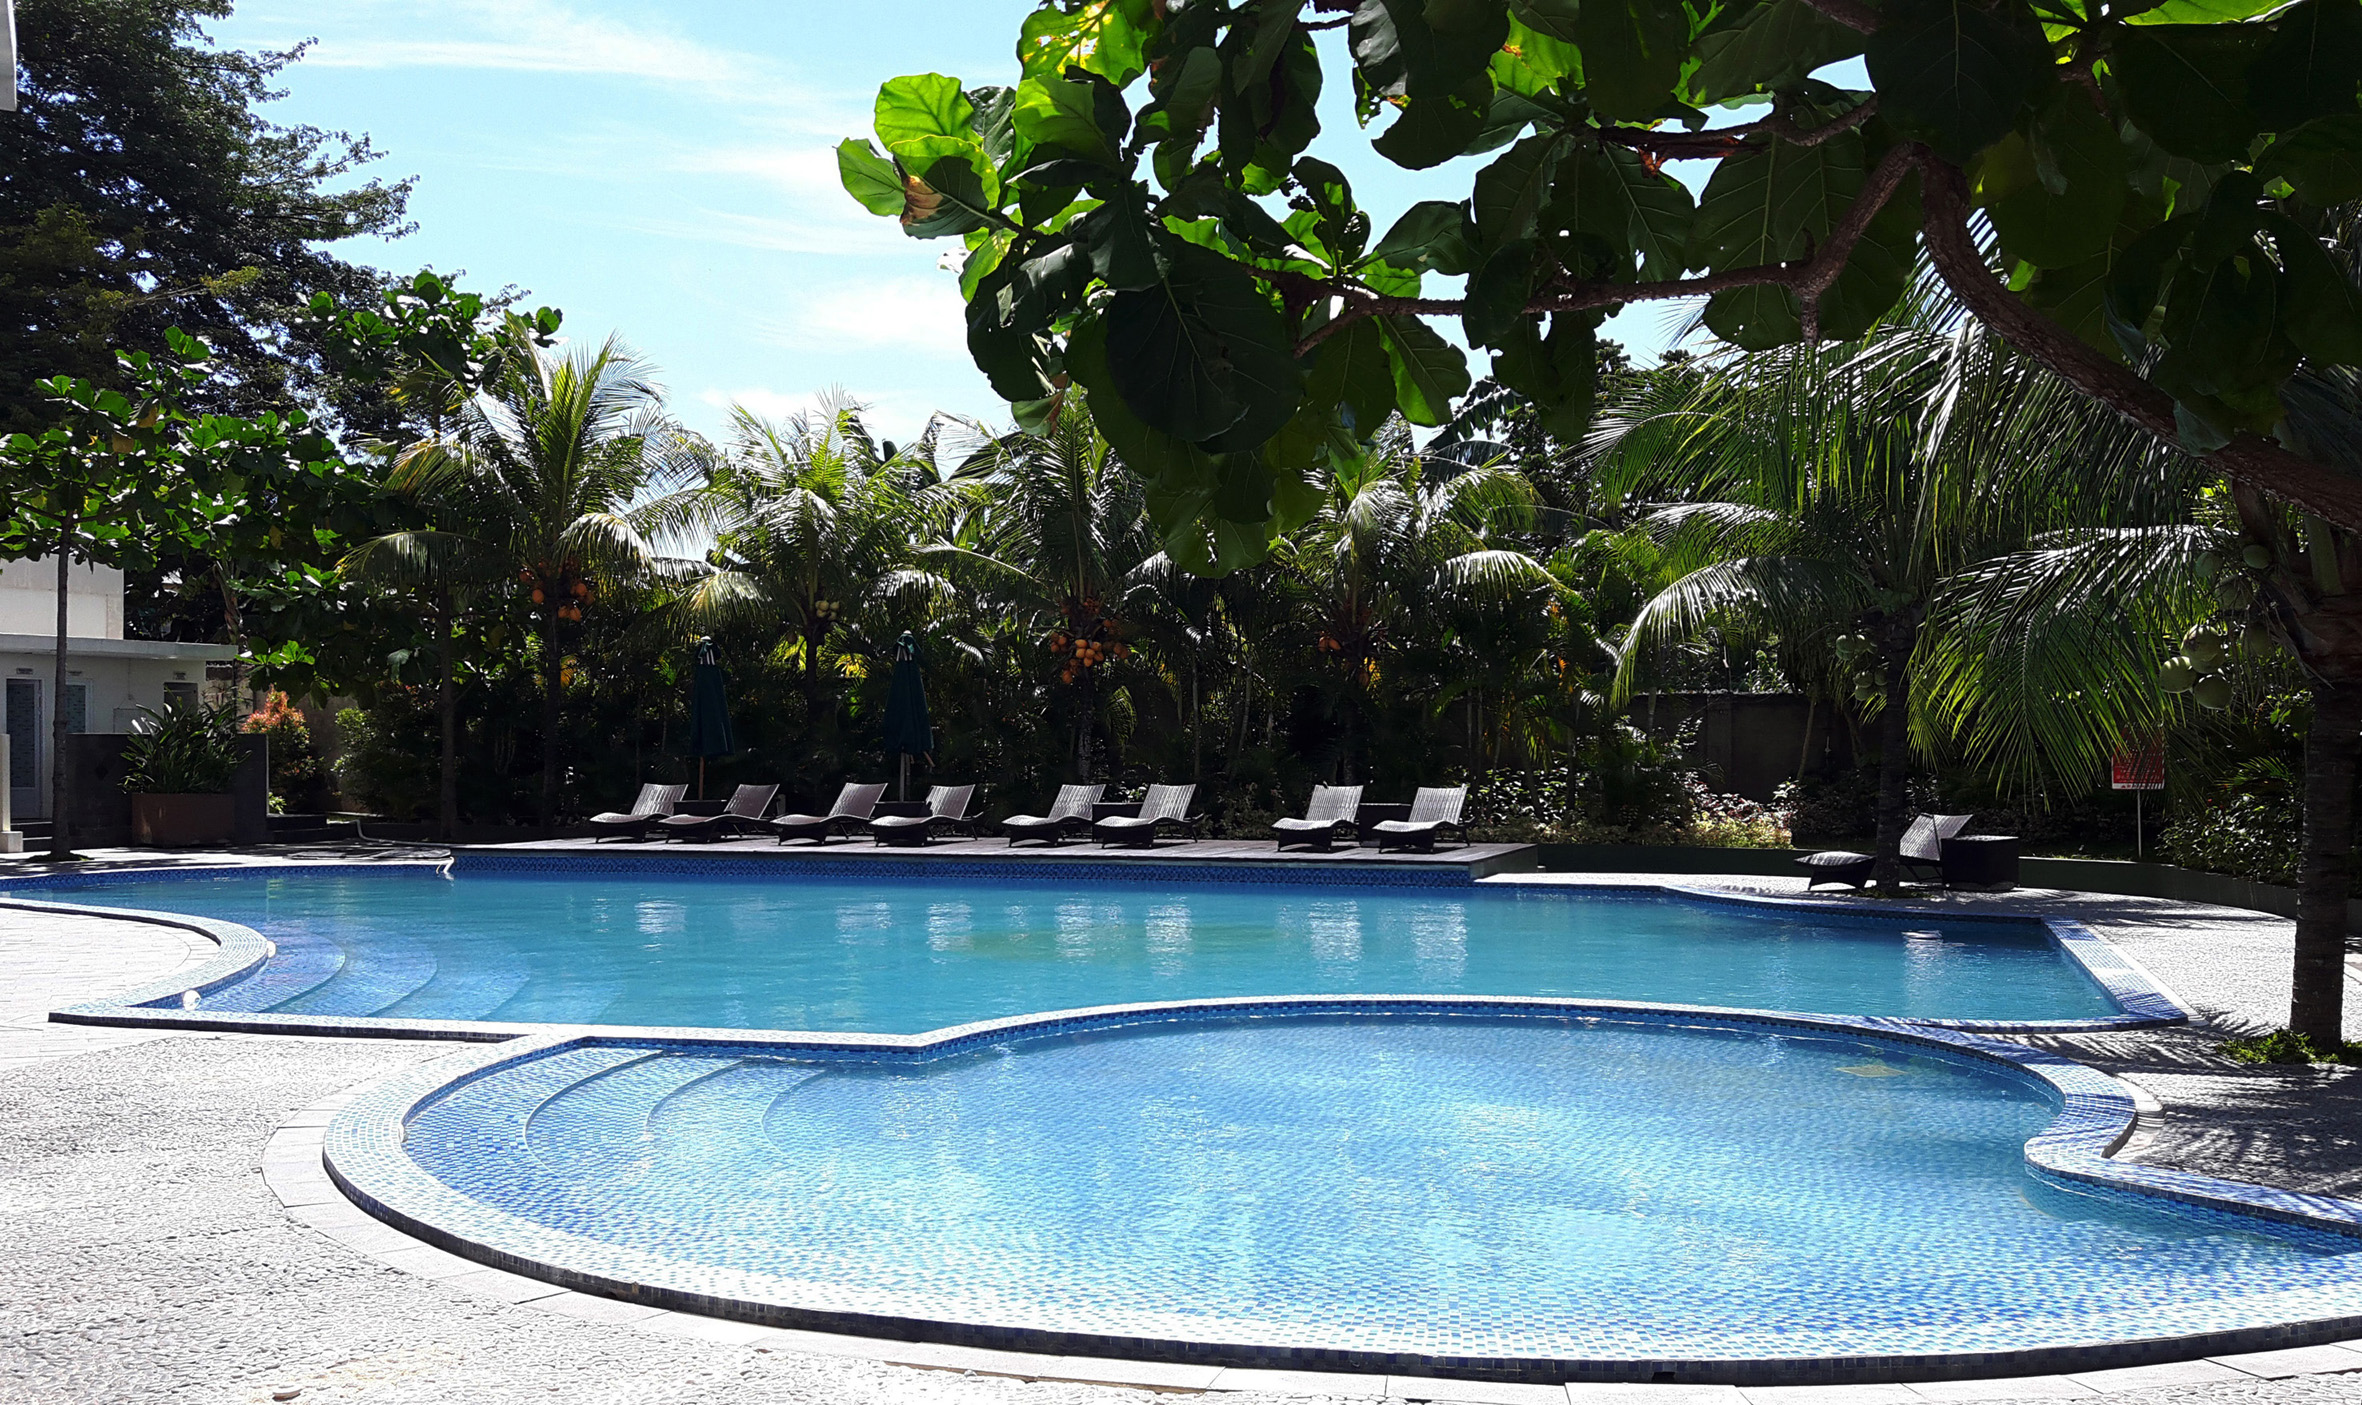 Swimming pool at Swiss-Belhotel Lampung, formerly The 7th Hotel & Convention Center